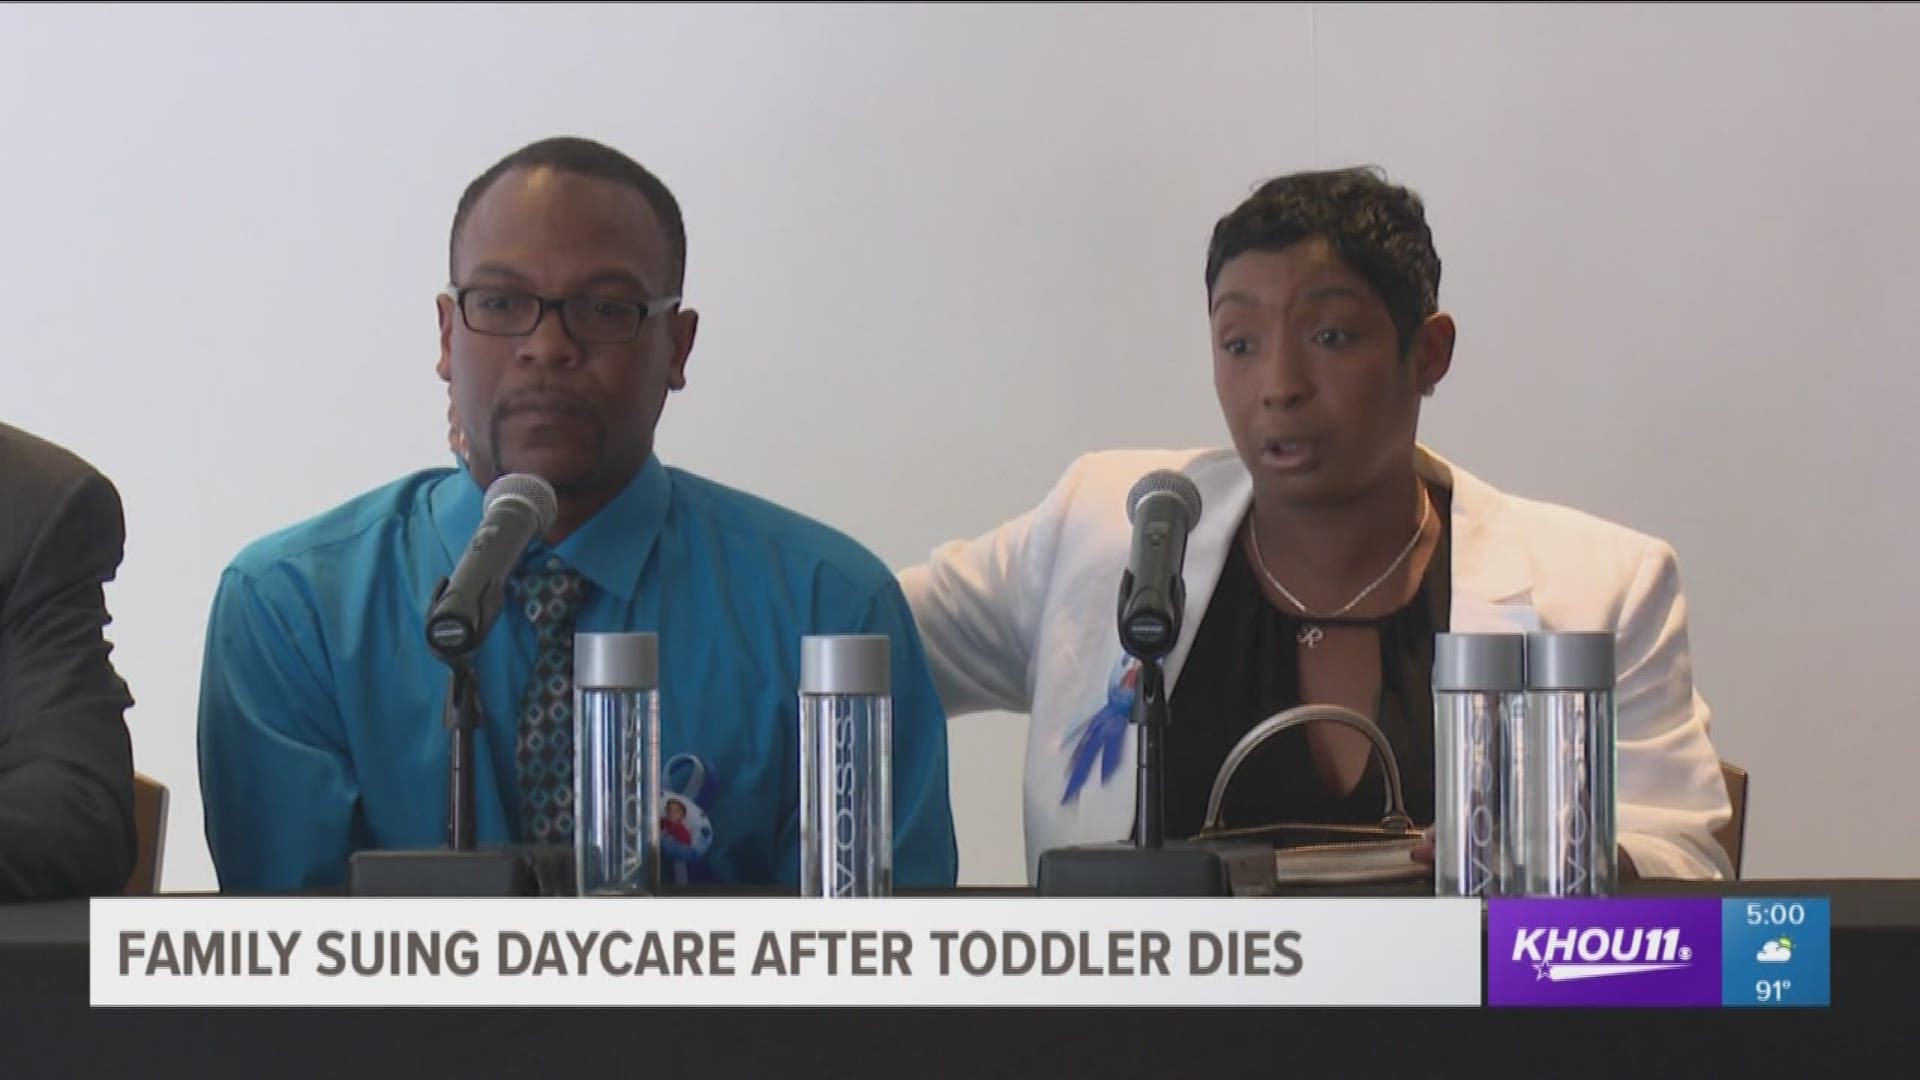 In an emotional interview with their attorney, the parents of the toddler who died after being left in a hot van spoke to the media Tuesday about the lawsuit they have filed against the daycare allegedly responsible for their son's death.